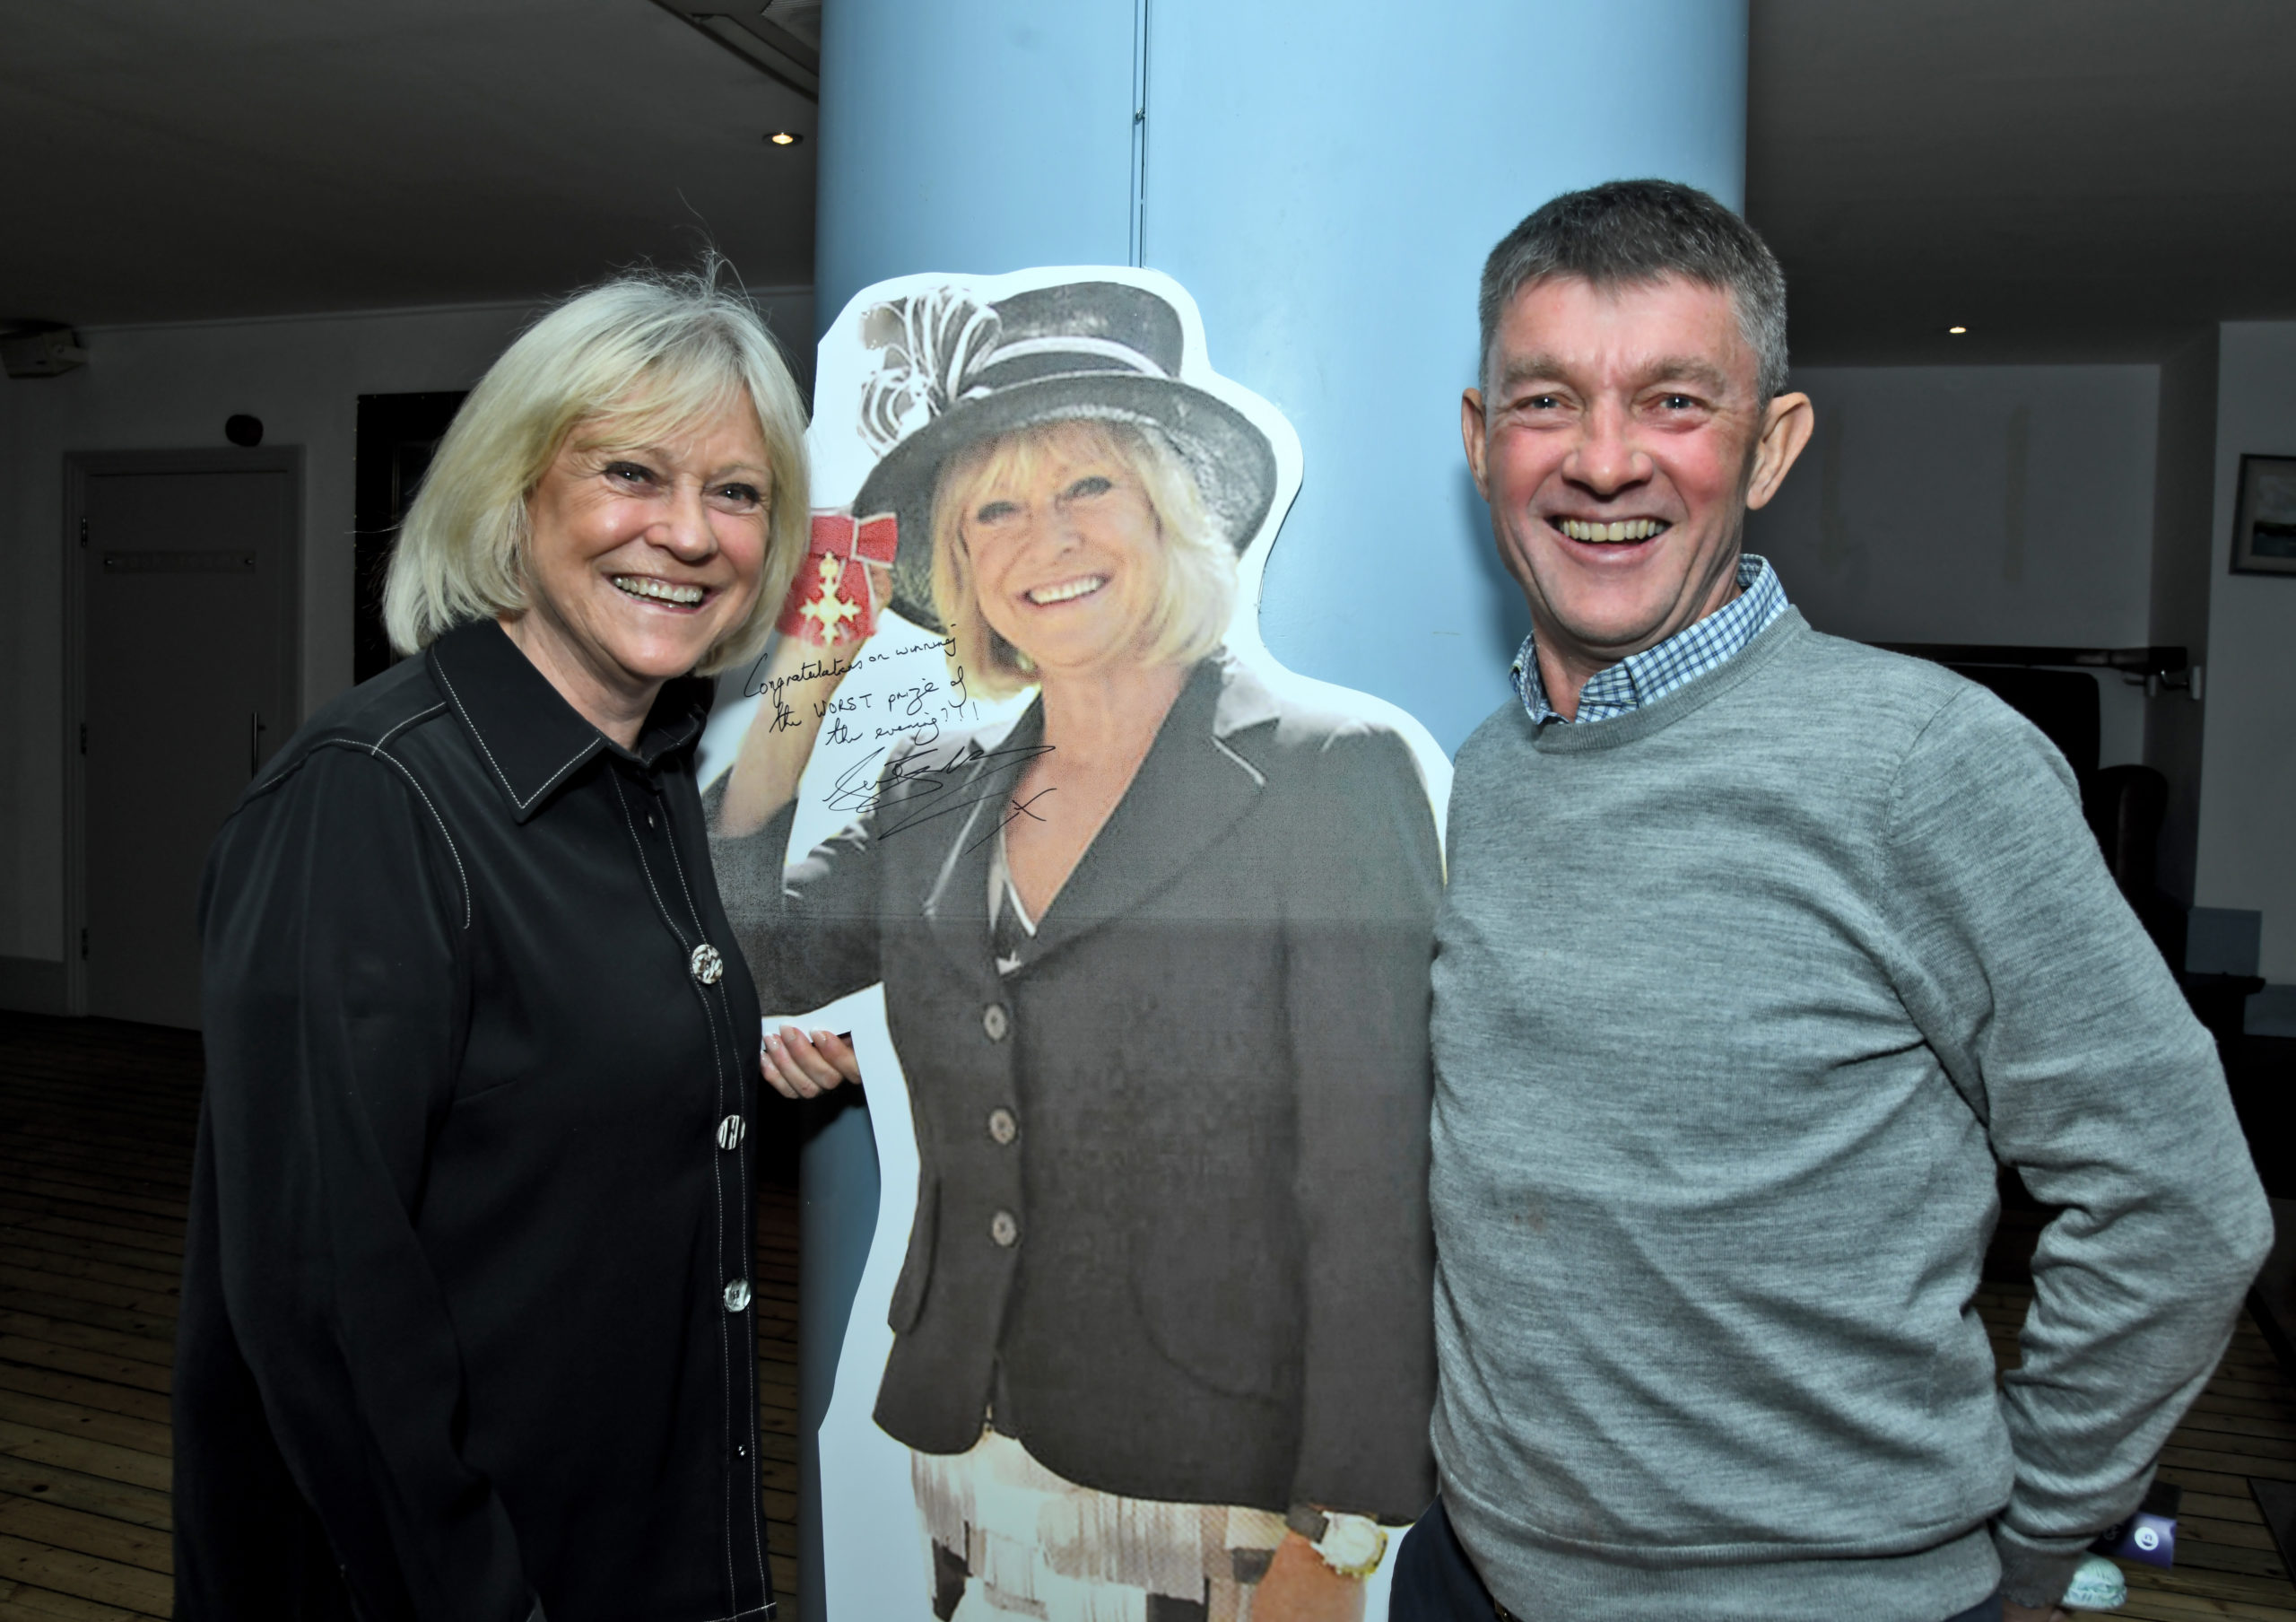 David Gooch won the Sue Barker cardboard cut-out which she inscribed as the ‘worst prize of the evening’